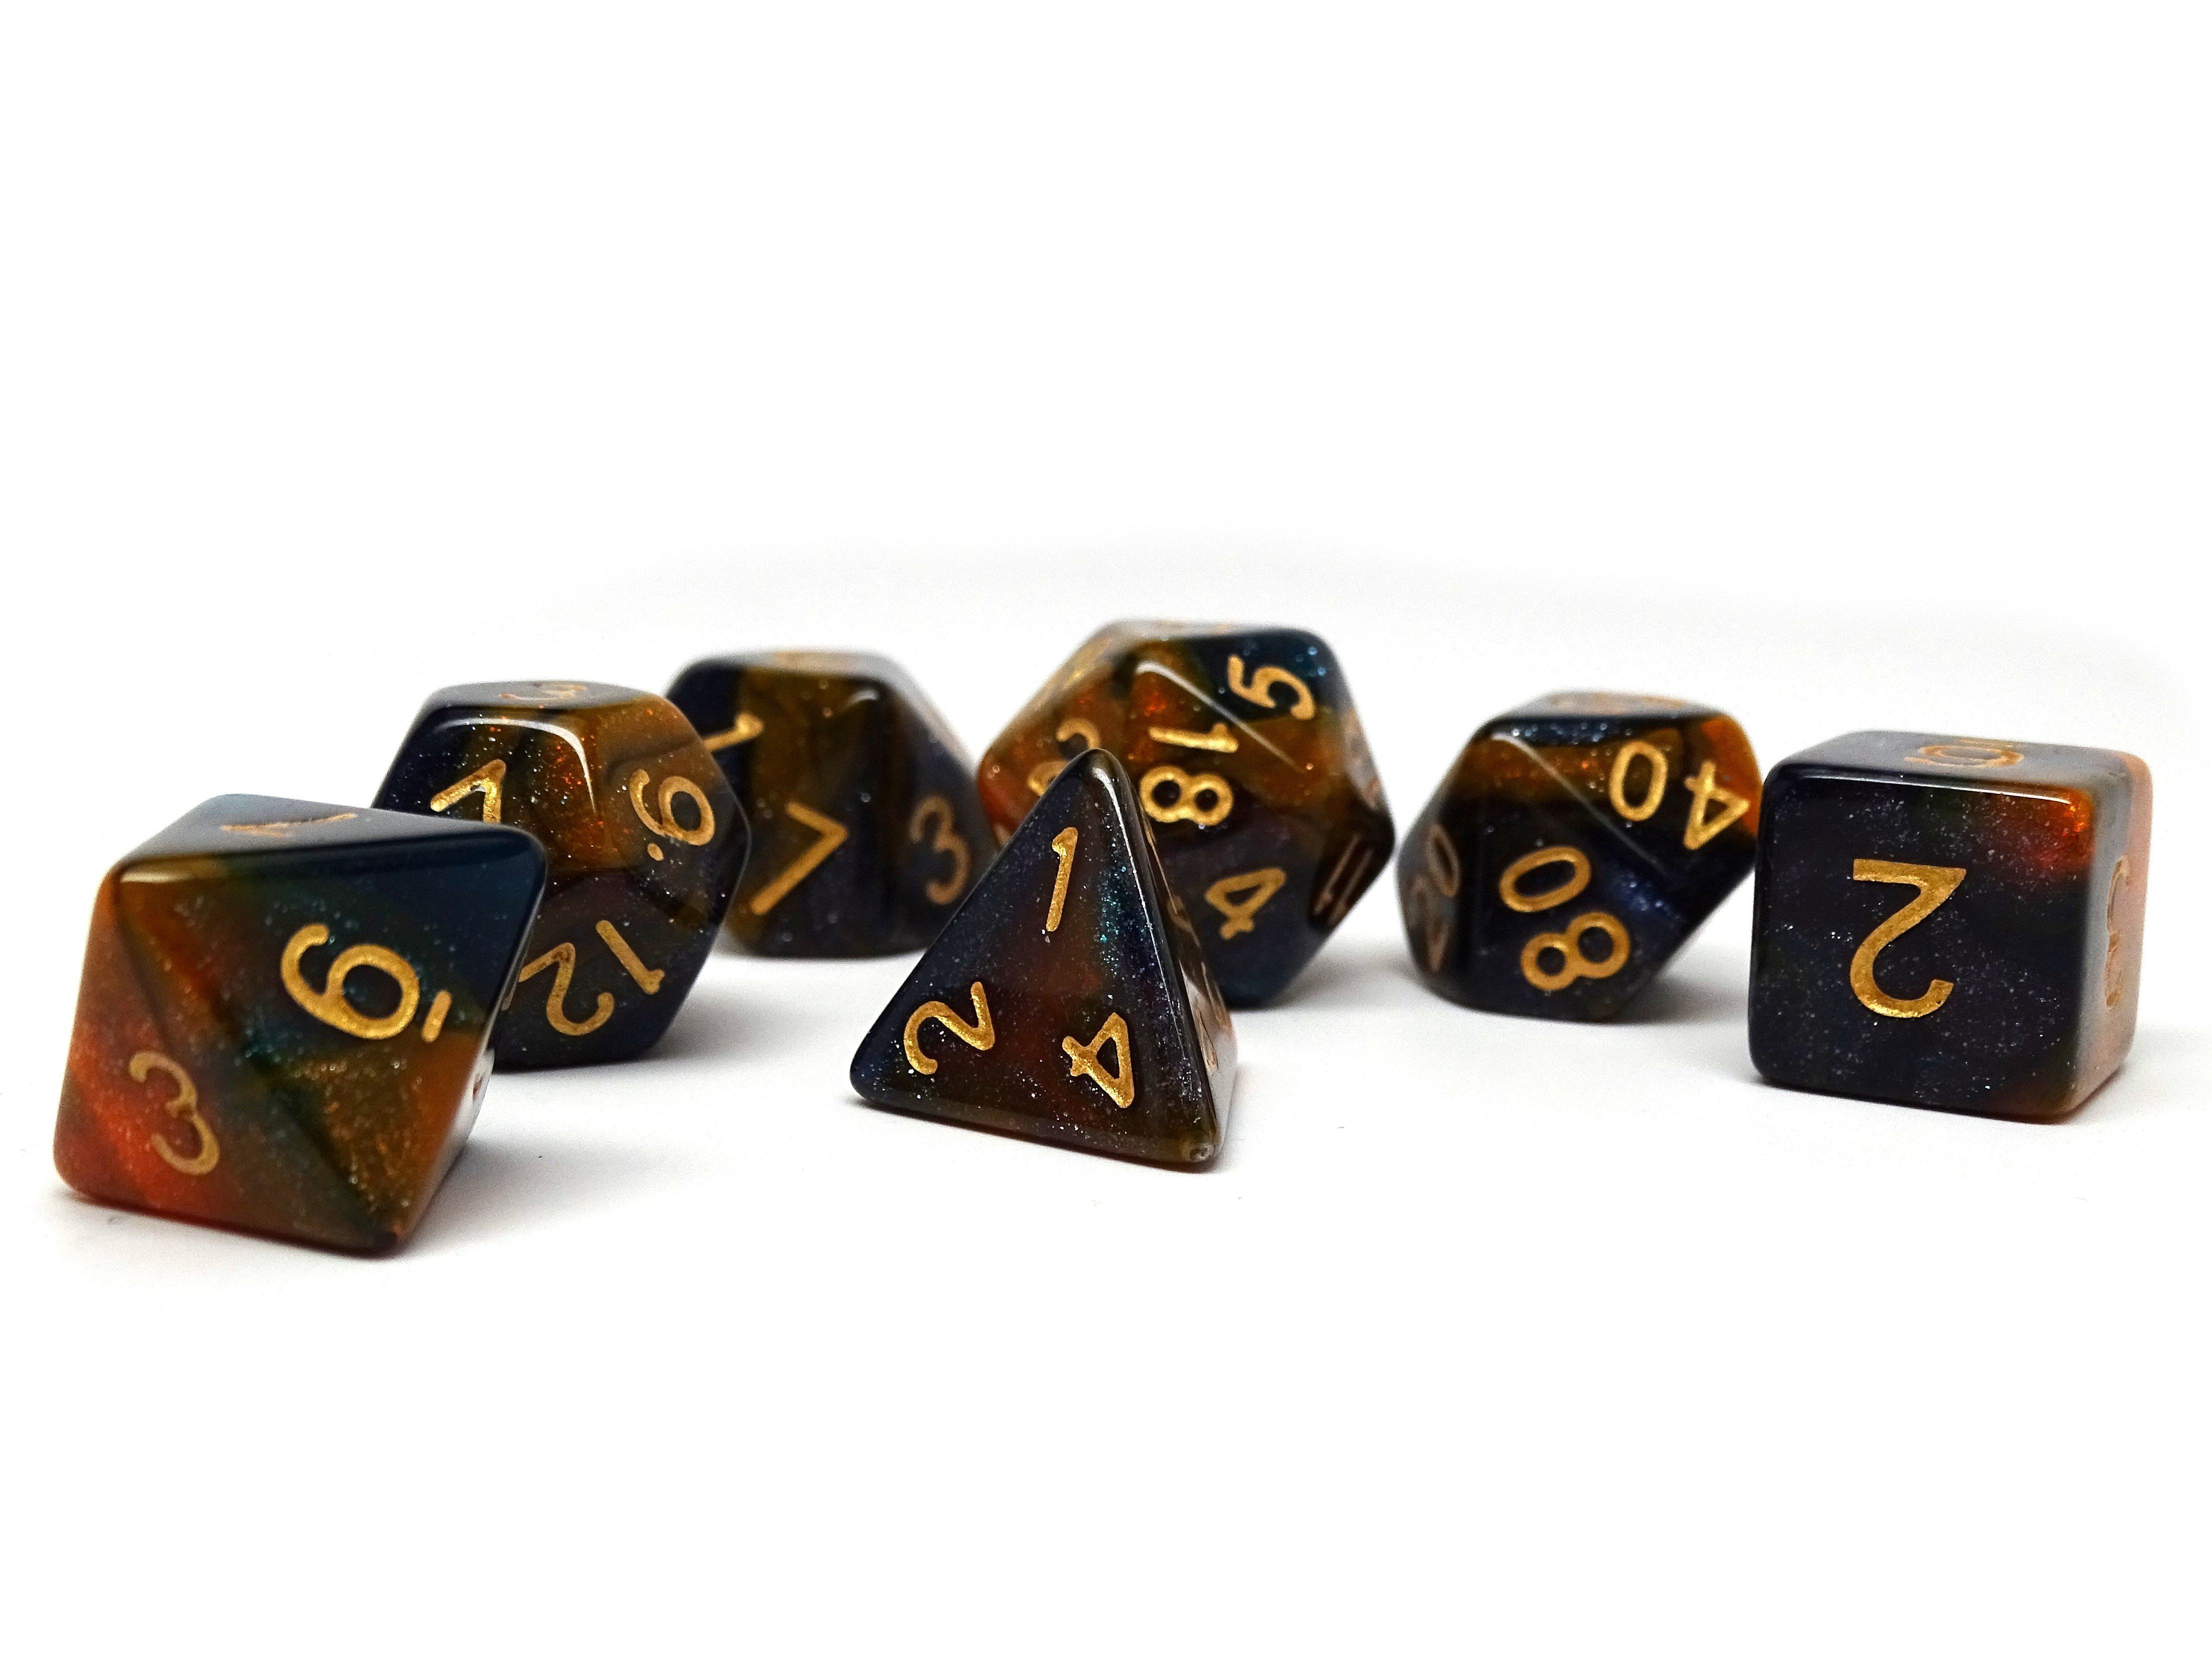 Orange and Blue Marble Dice Collection - 7 Piece Set